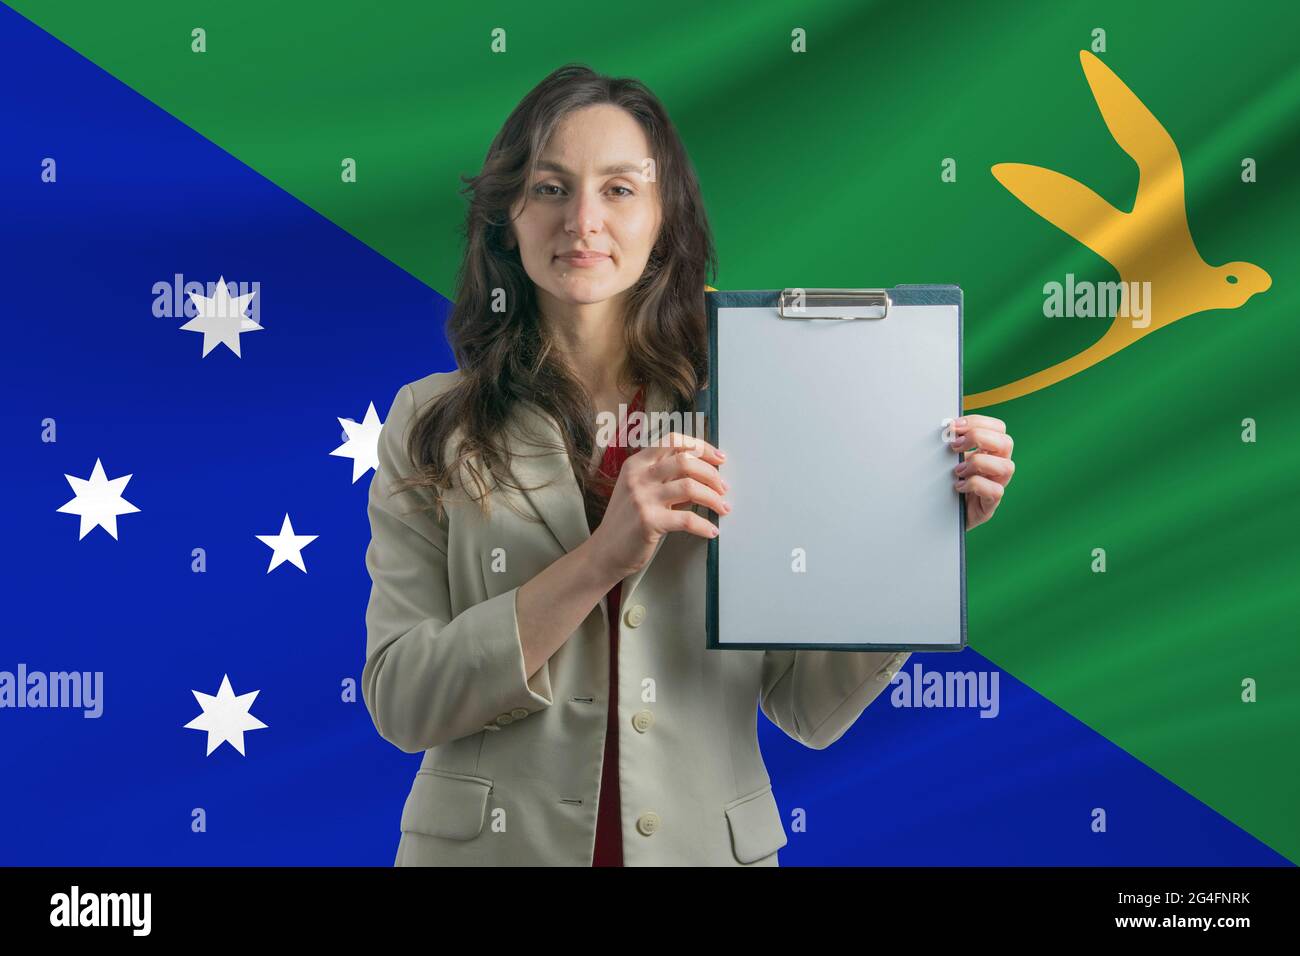 Study in Christmas Island. Beautiful woman holding a sheet of paper in her hands. Girl on the background of the flag of Christmas Island. Stock Photo